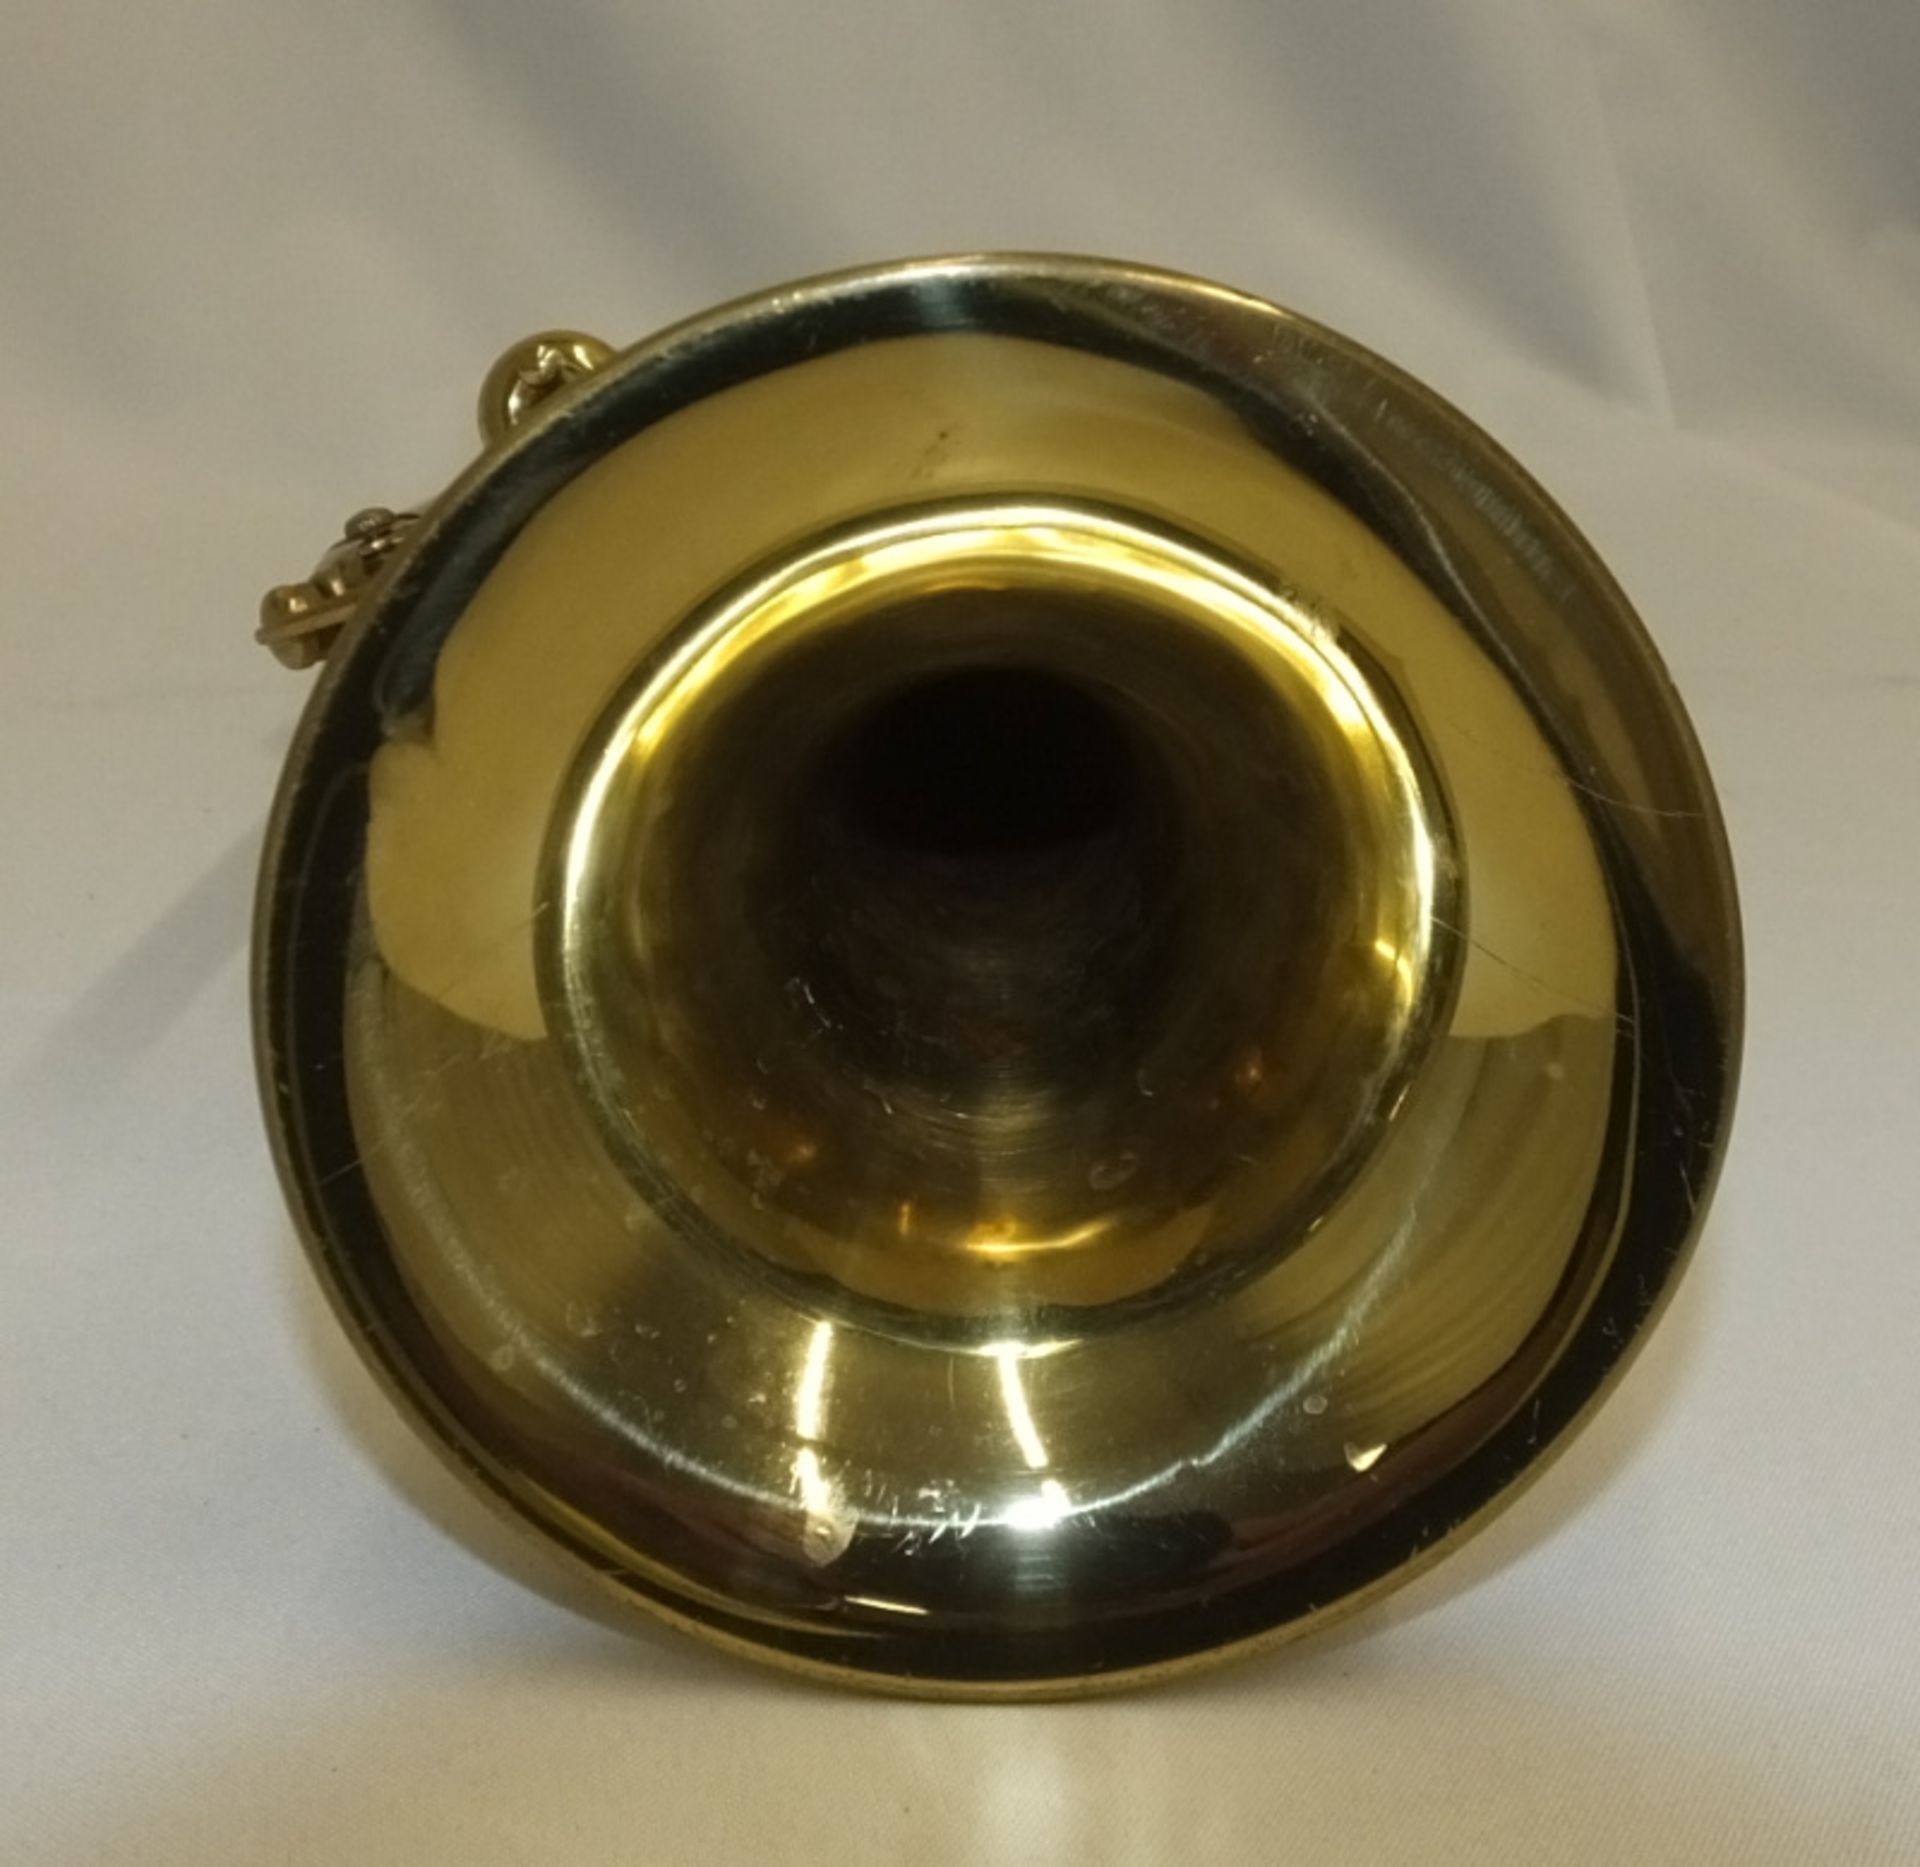 Corton 80 Trumpet in case - serial number 056226 - Please check photos carefully - Image 10 of 14